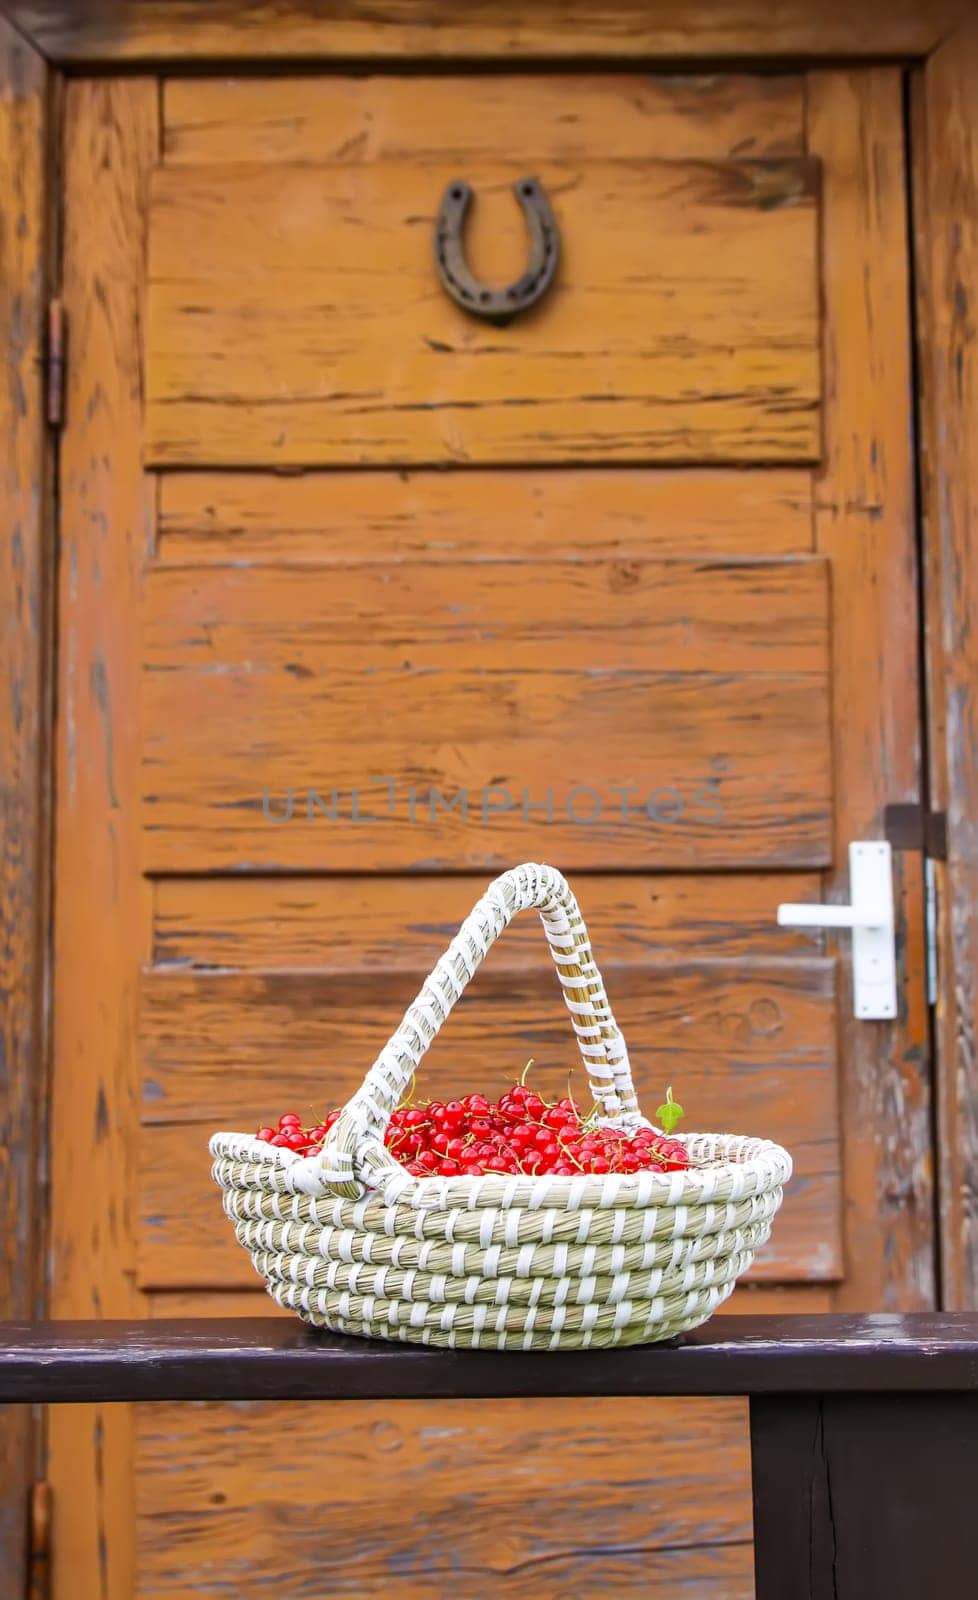 Red currant berries in a wicker basket on wooden door background in the village.